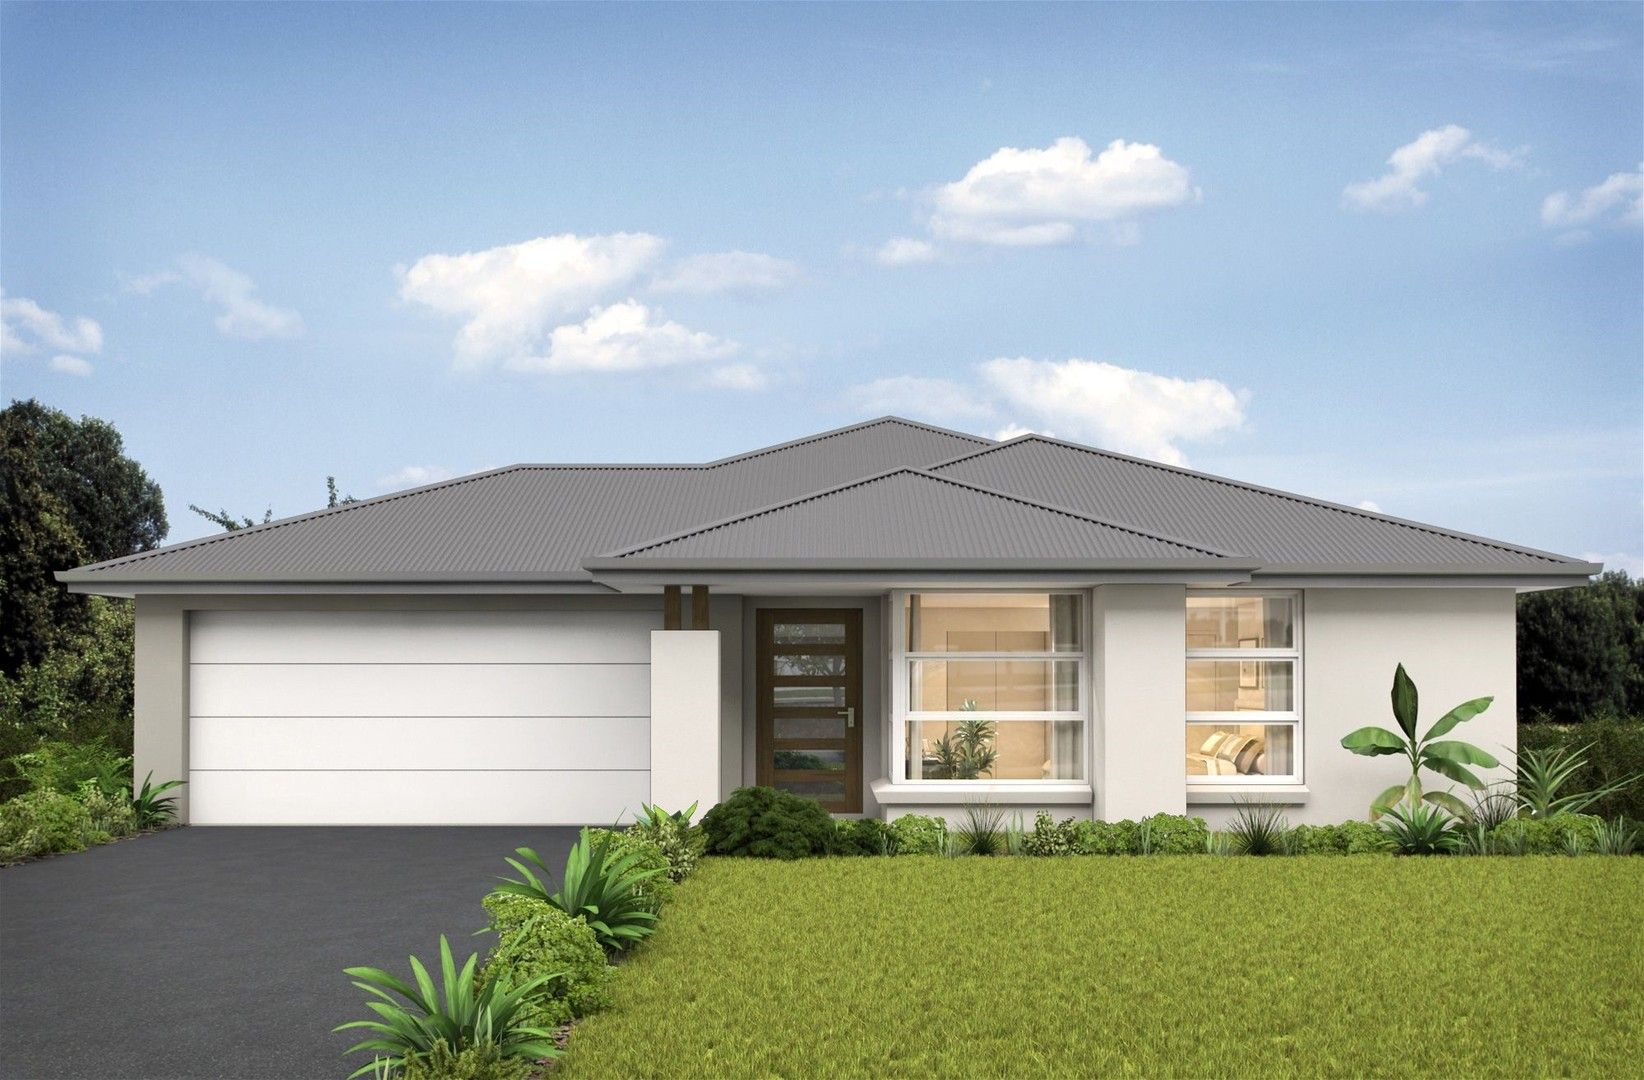 4 bedrooms New House & Land in Lot 1240 Cessna Avenue COORANBONG NSW, 2265